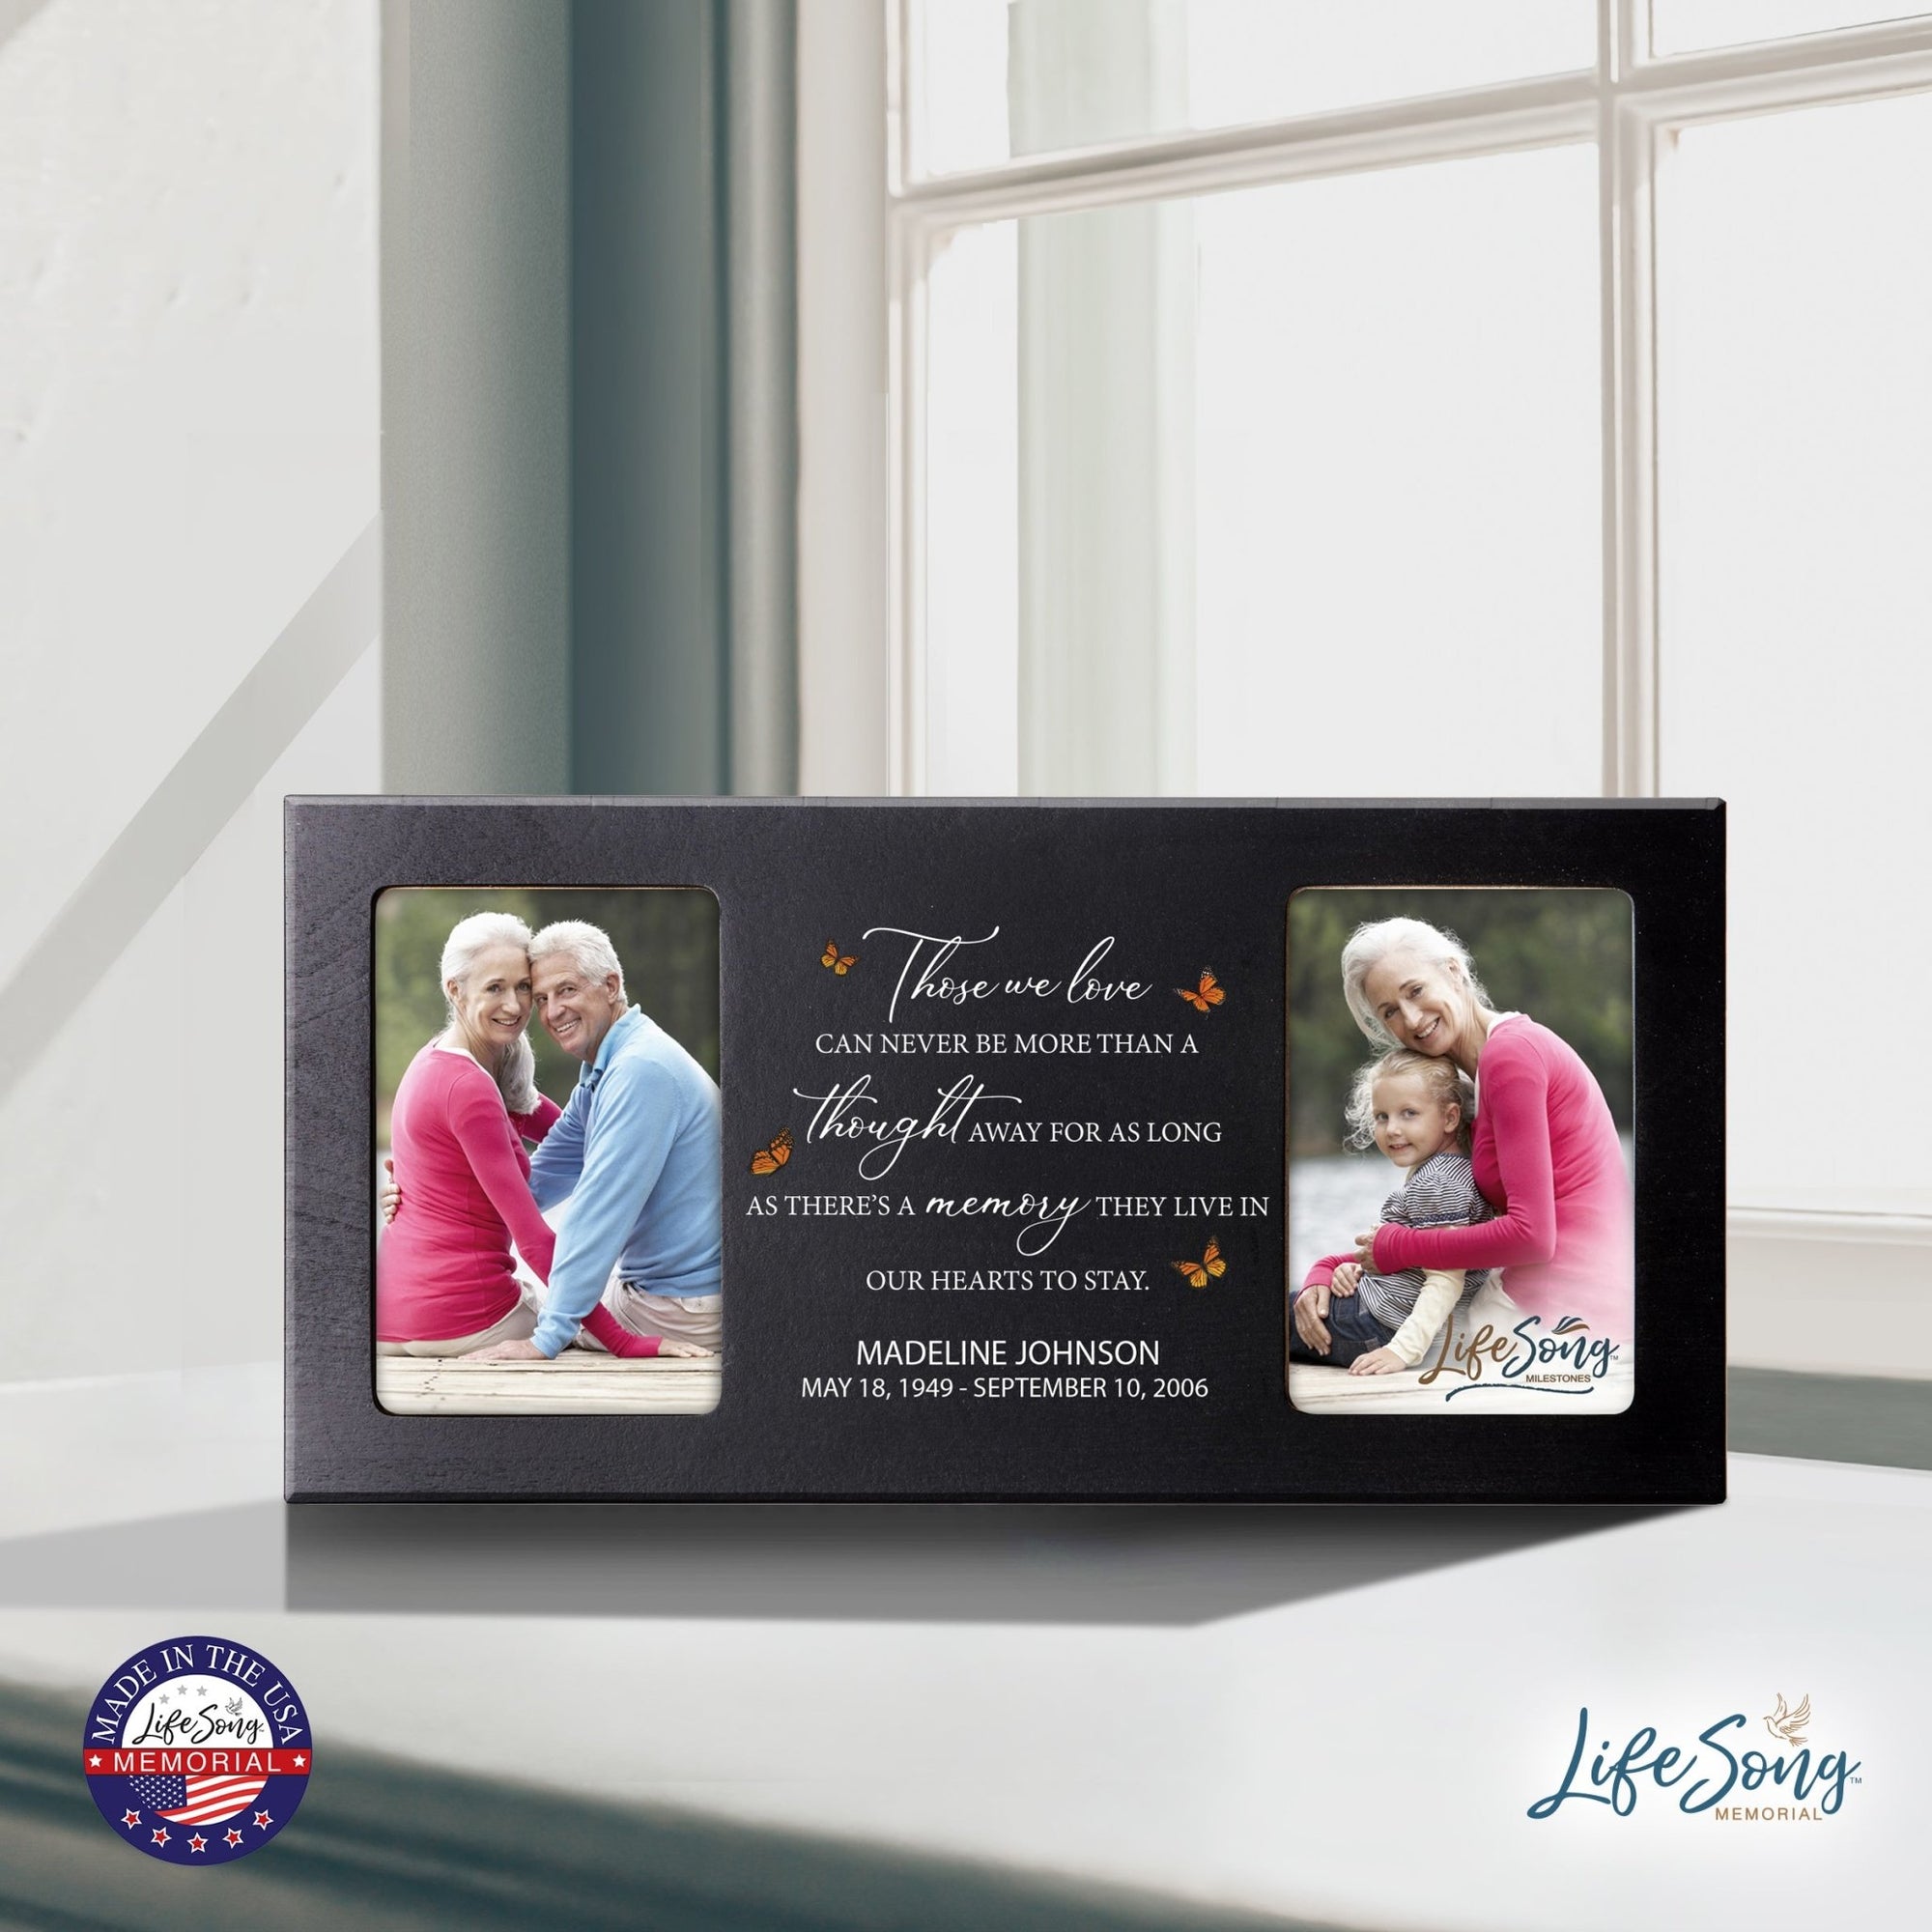 Custom Memorial Picture Frame 16x8in Holds Two 4x6in Photos - A Memory They Live In - LifeSong Milestones